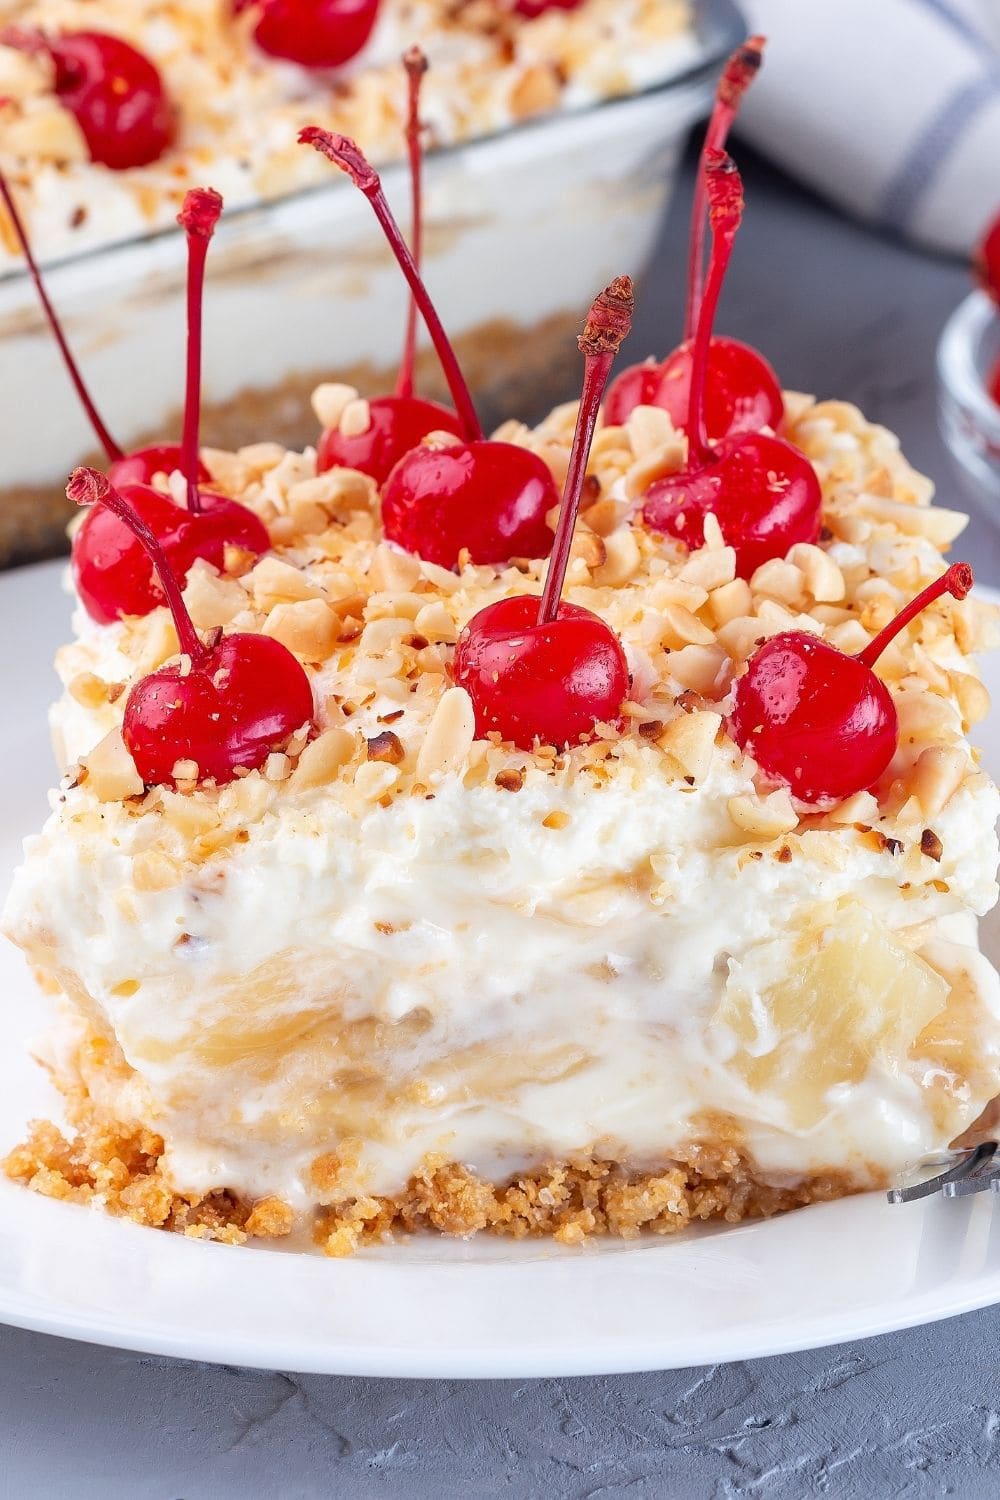 Banana Split Cake Topped With Crushed Nuts and Fresh Red Cherries